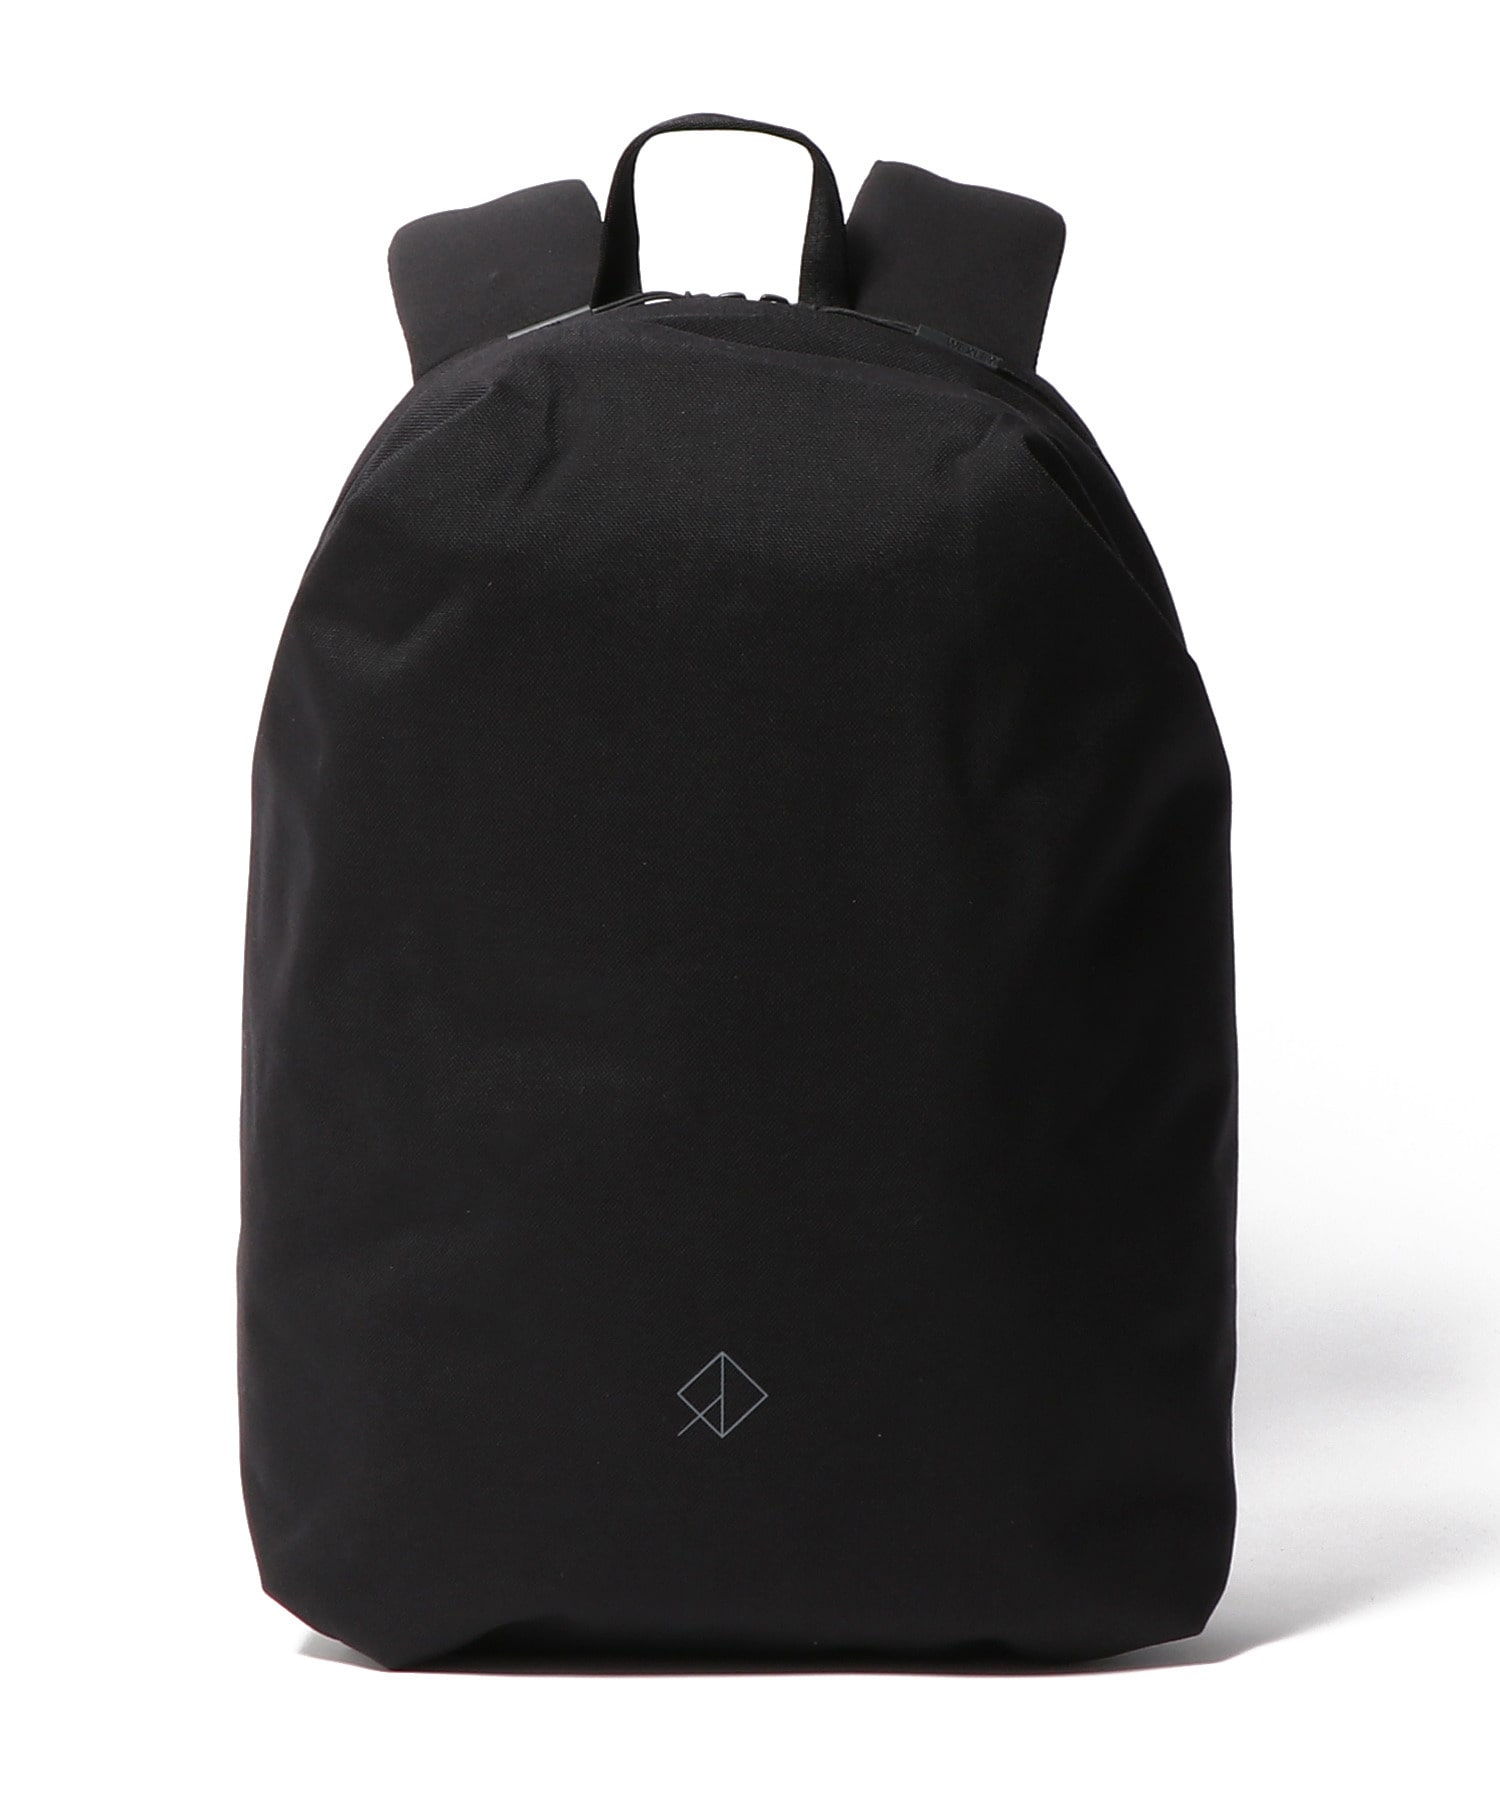 WEXLEY / URBAN BACKPACK CORDURA バックパック